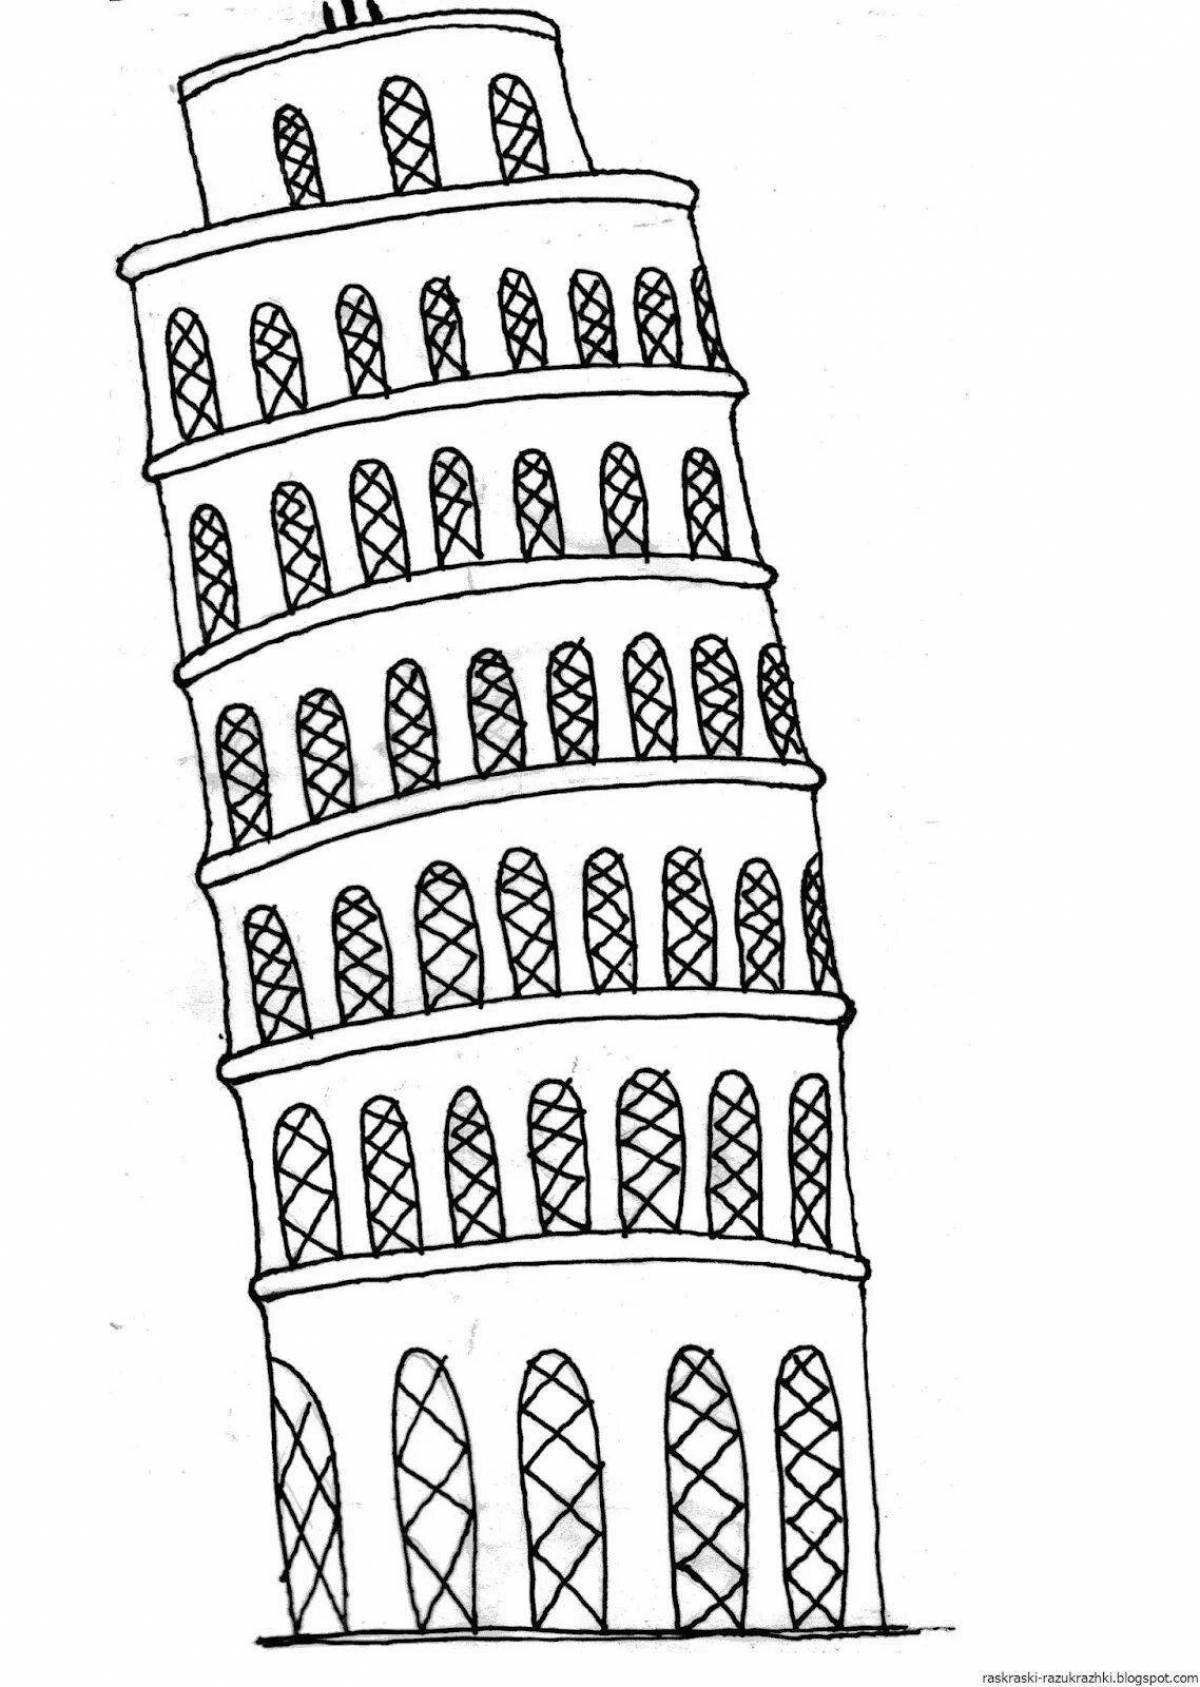 Exquisite coloring of the Leaning Tower of Pisa